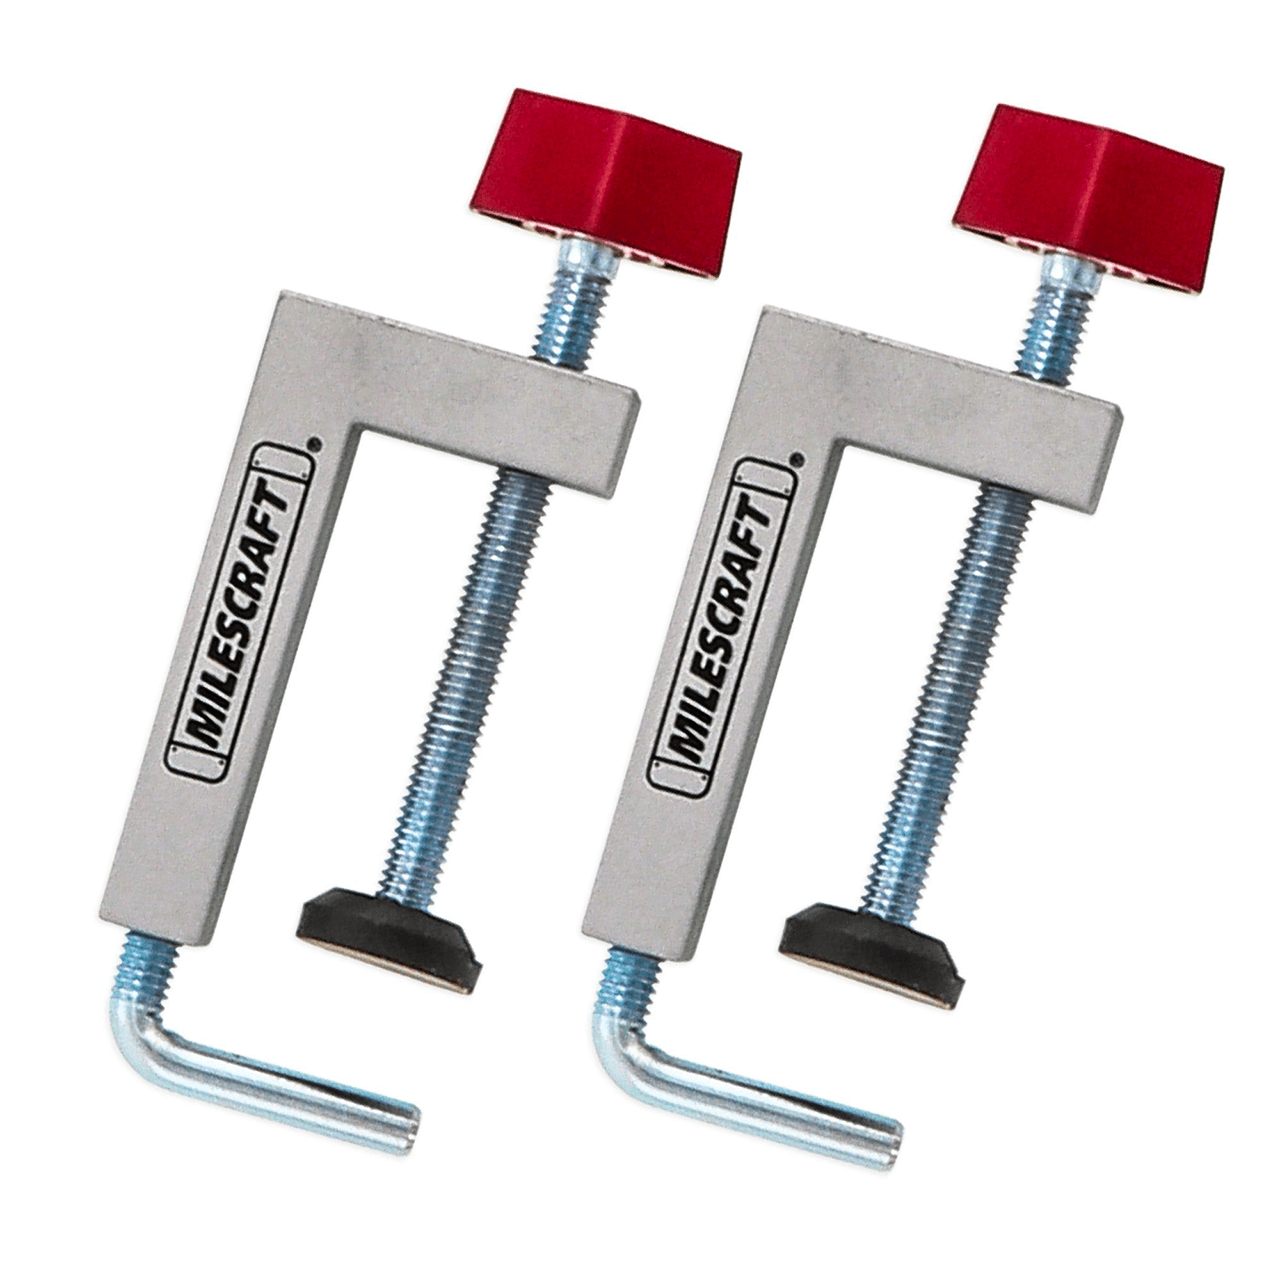 Milescraft 4009 Universal Fence Clamps (2-Pack)